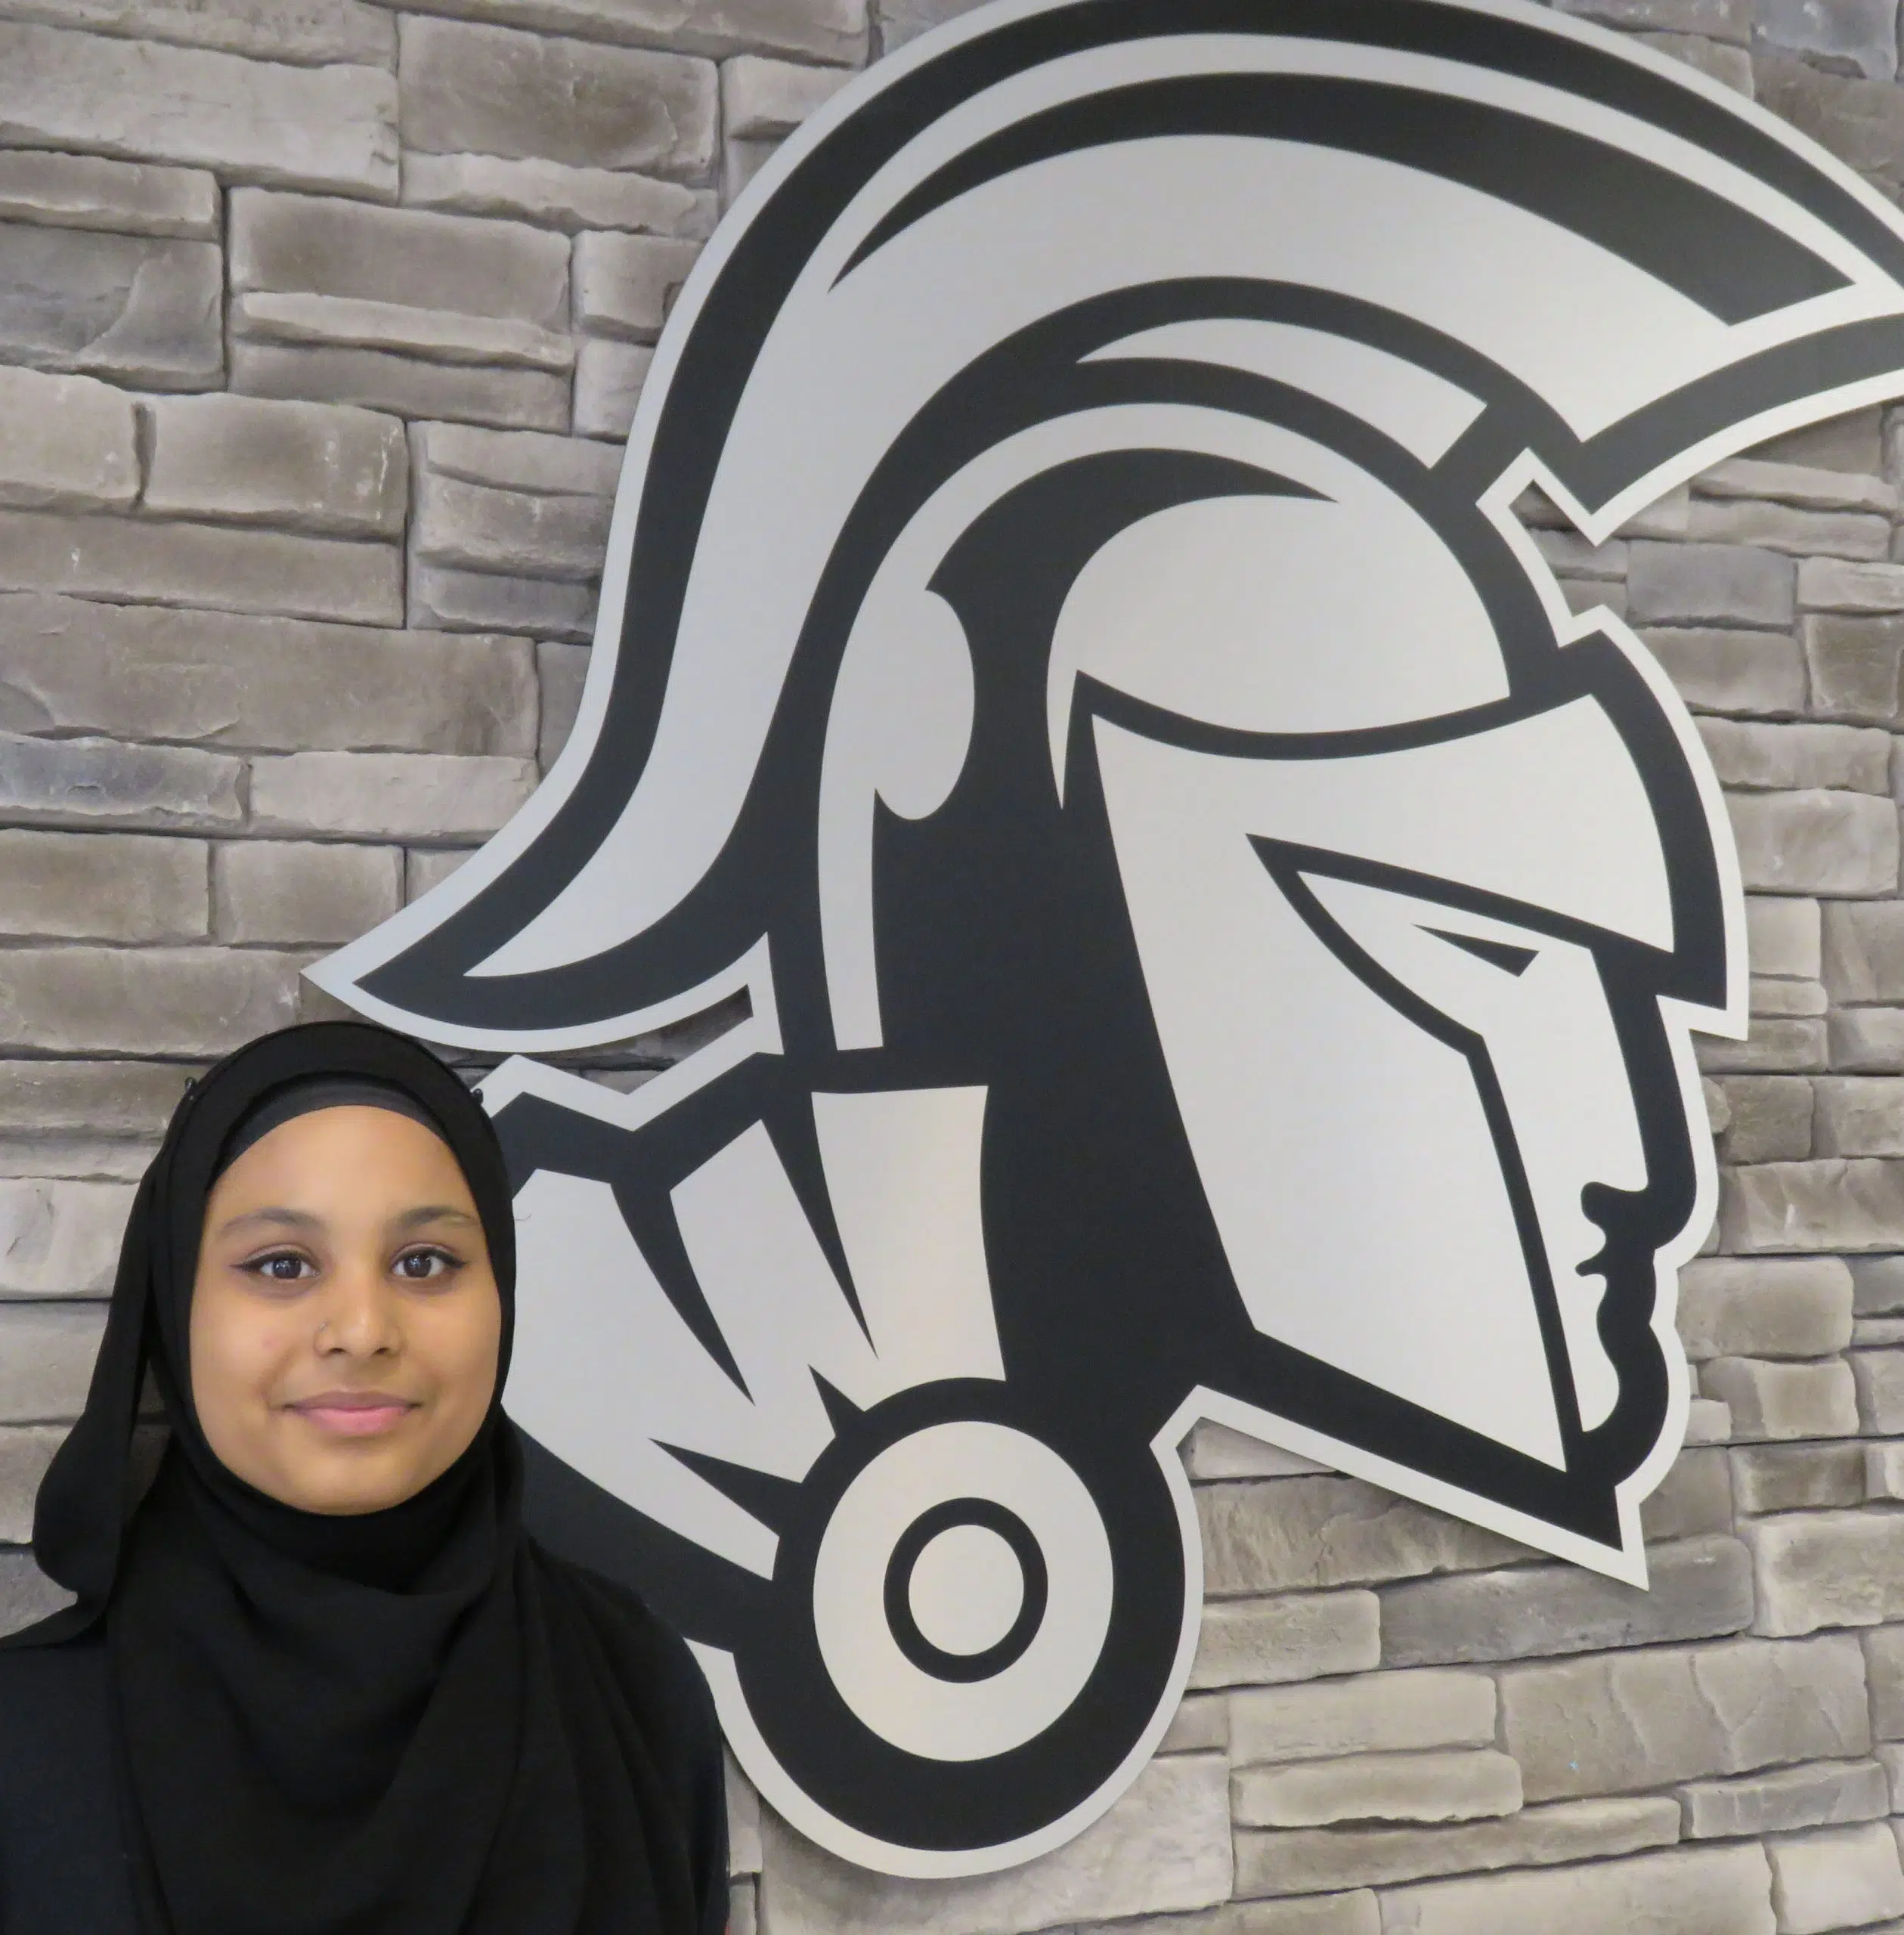 Centre Hastings student heading to Queen's Park